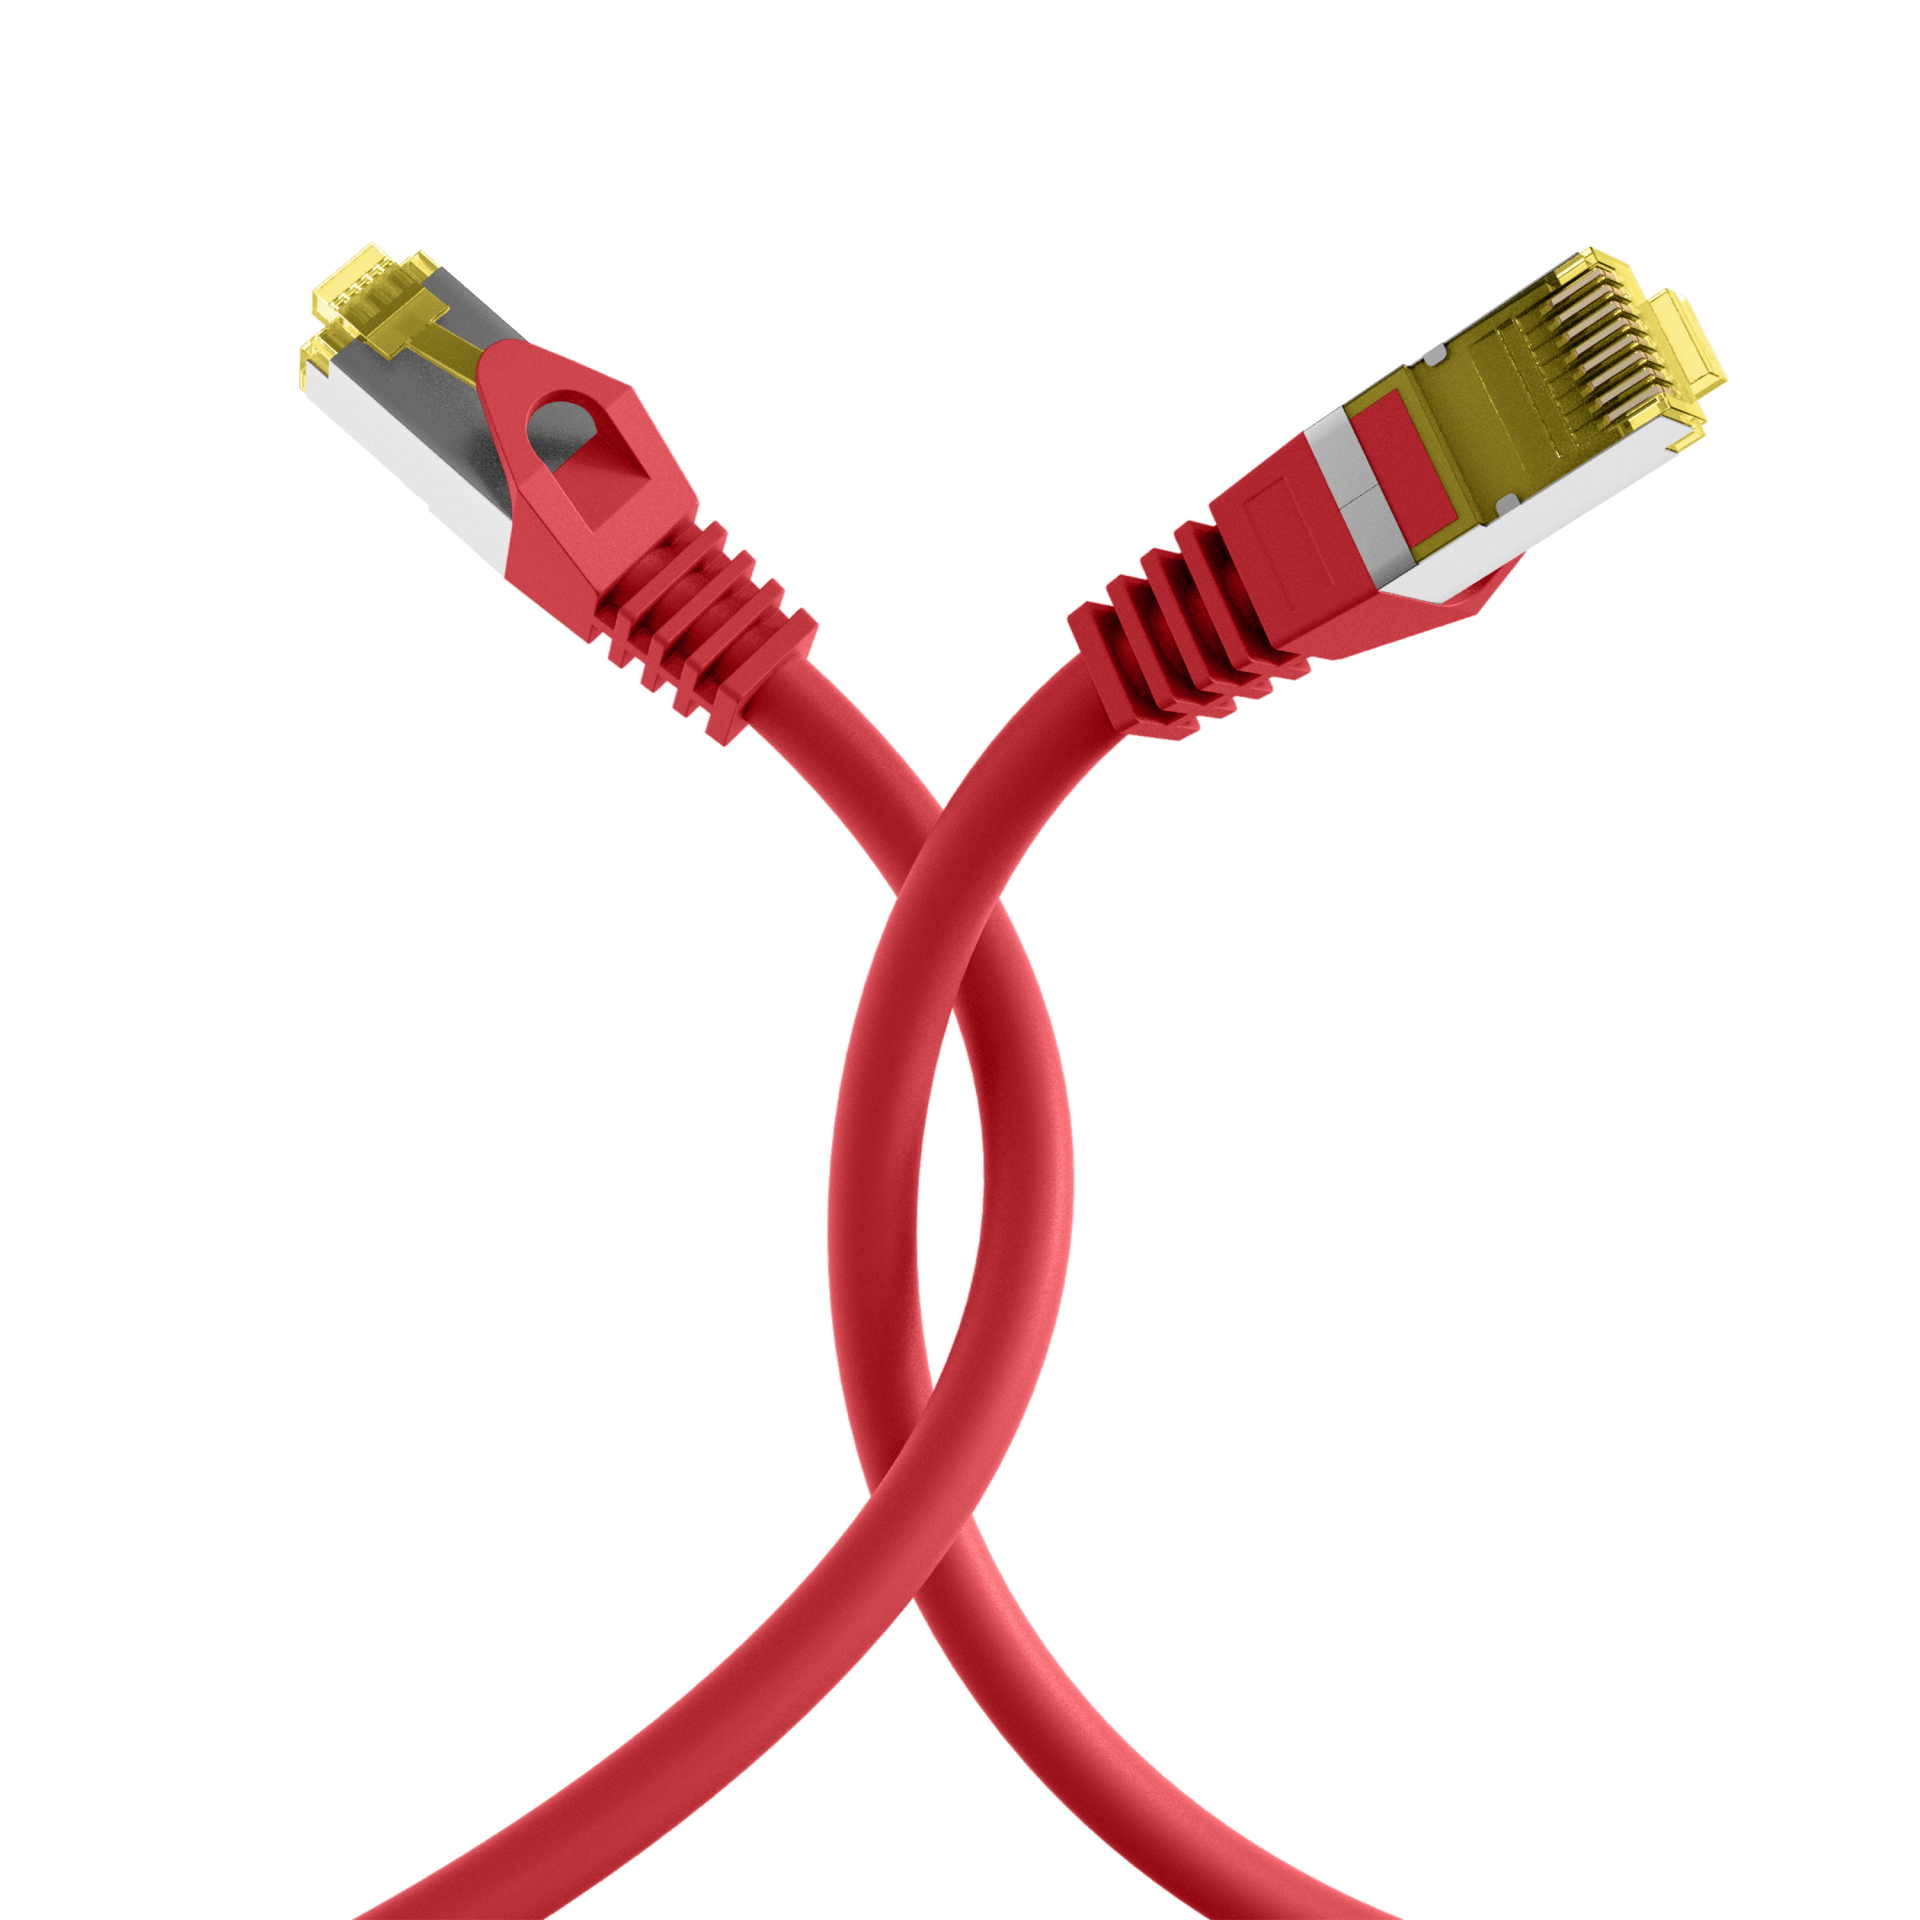 RJ45 Patch Cord Cat.6A S/FTP LSZH Cat.7 raw cable red 25m